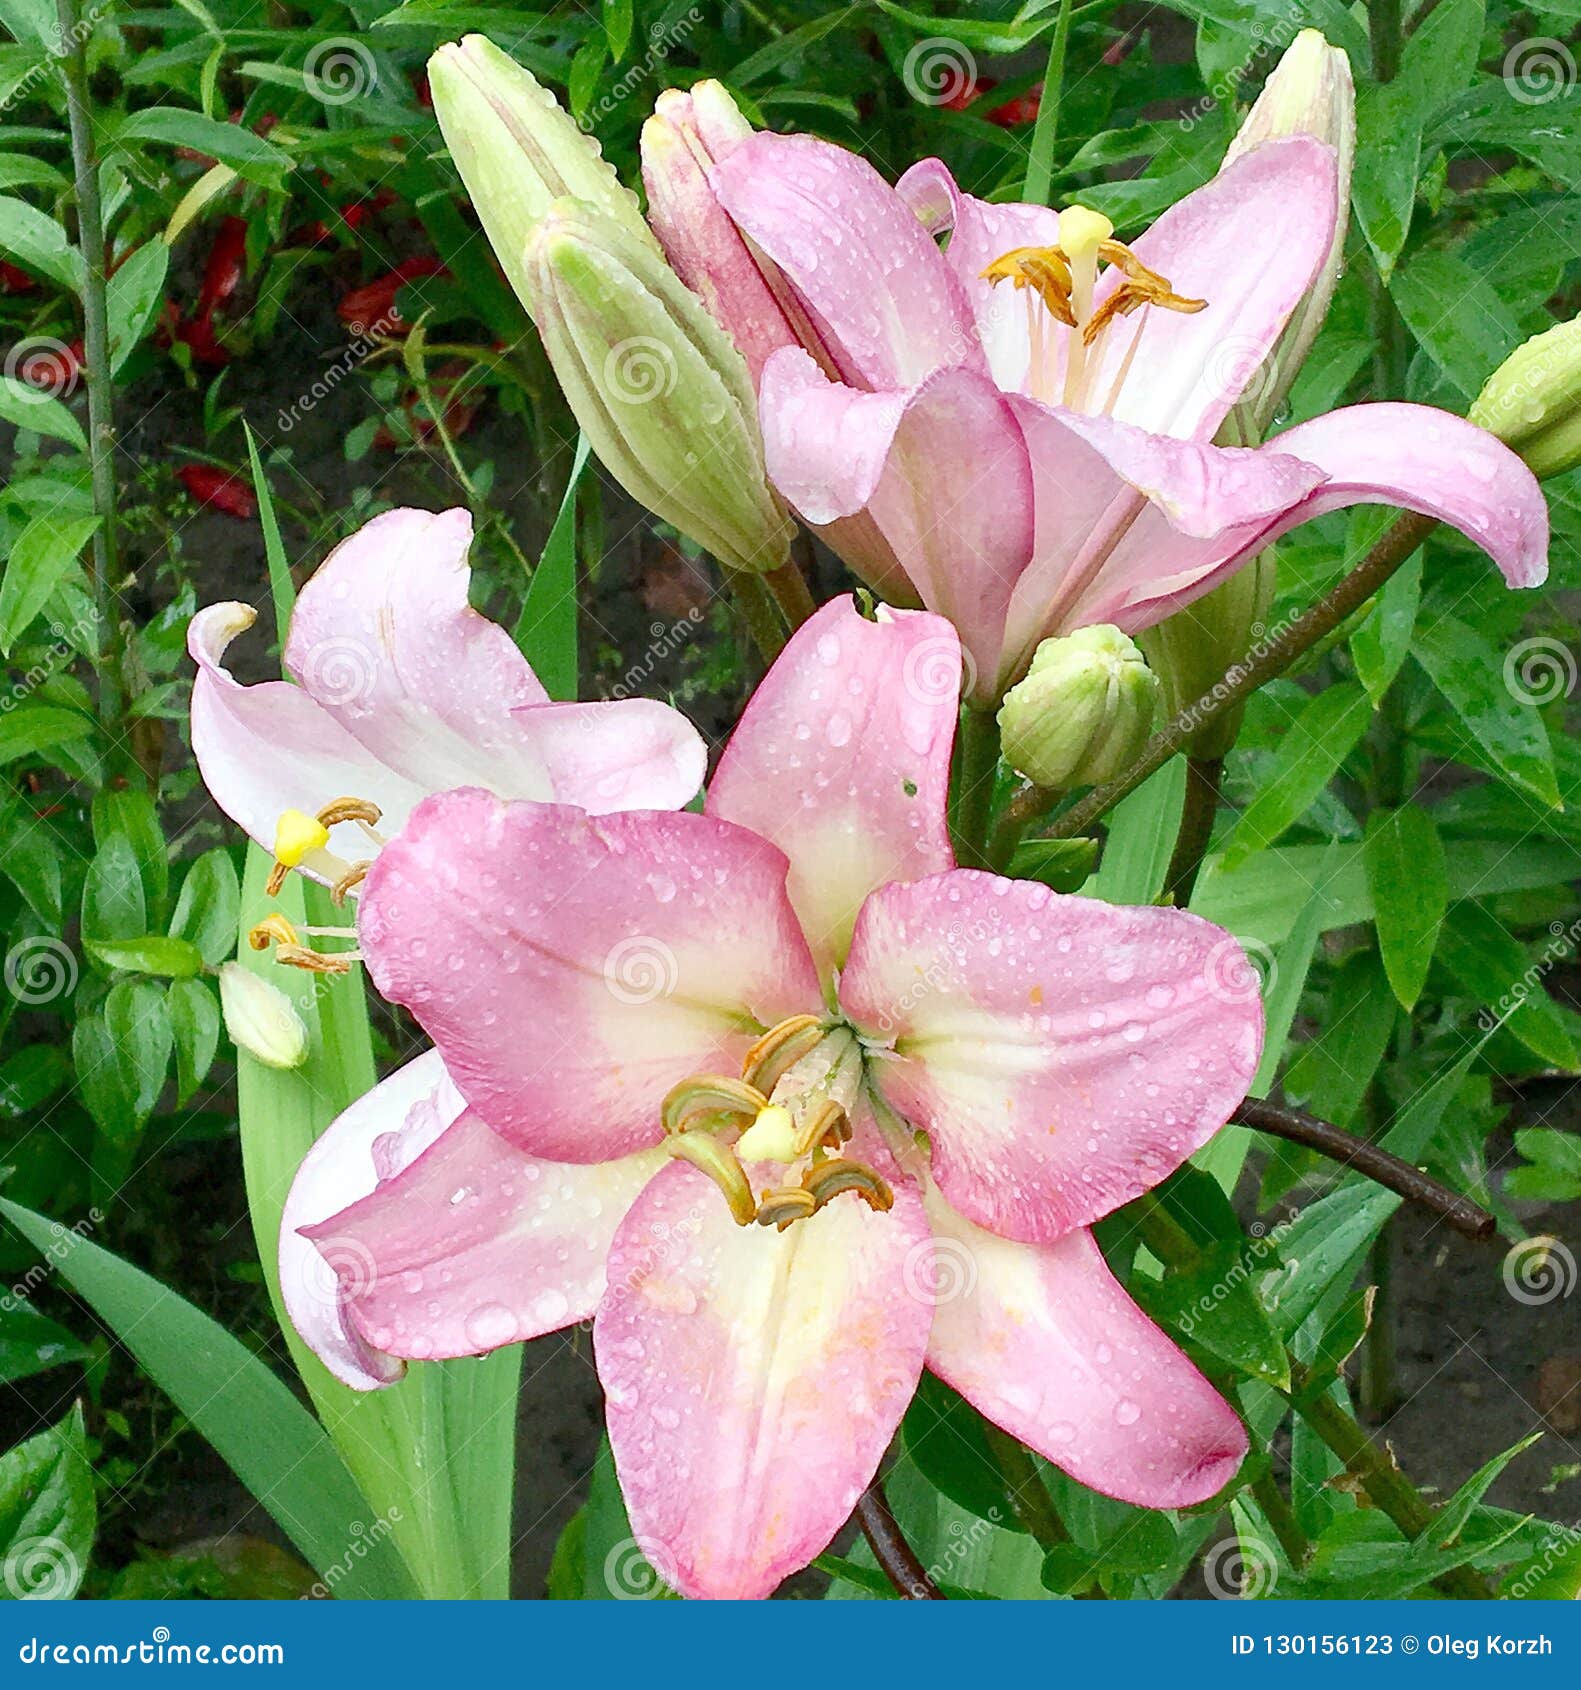 Blooming Flower Lily with Green Leaves, Living Natural Nature Stock ...